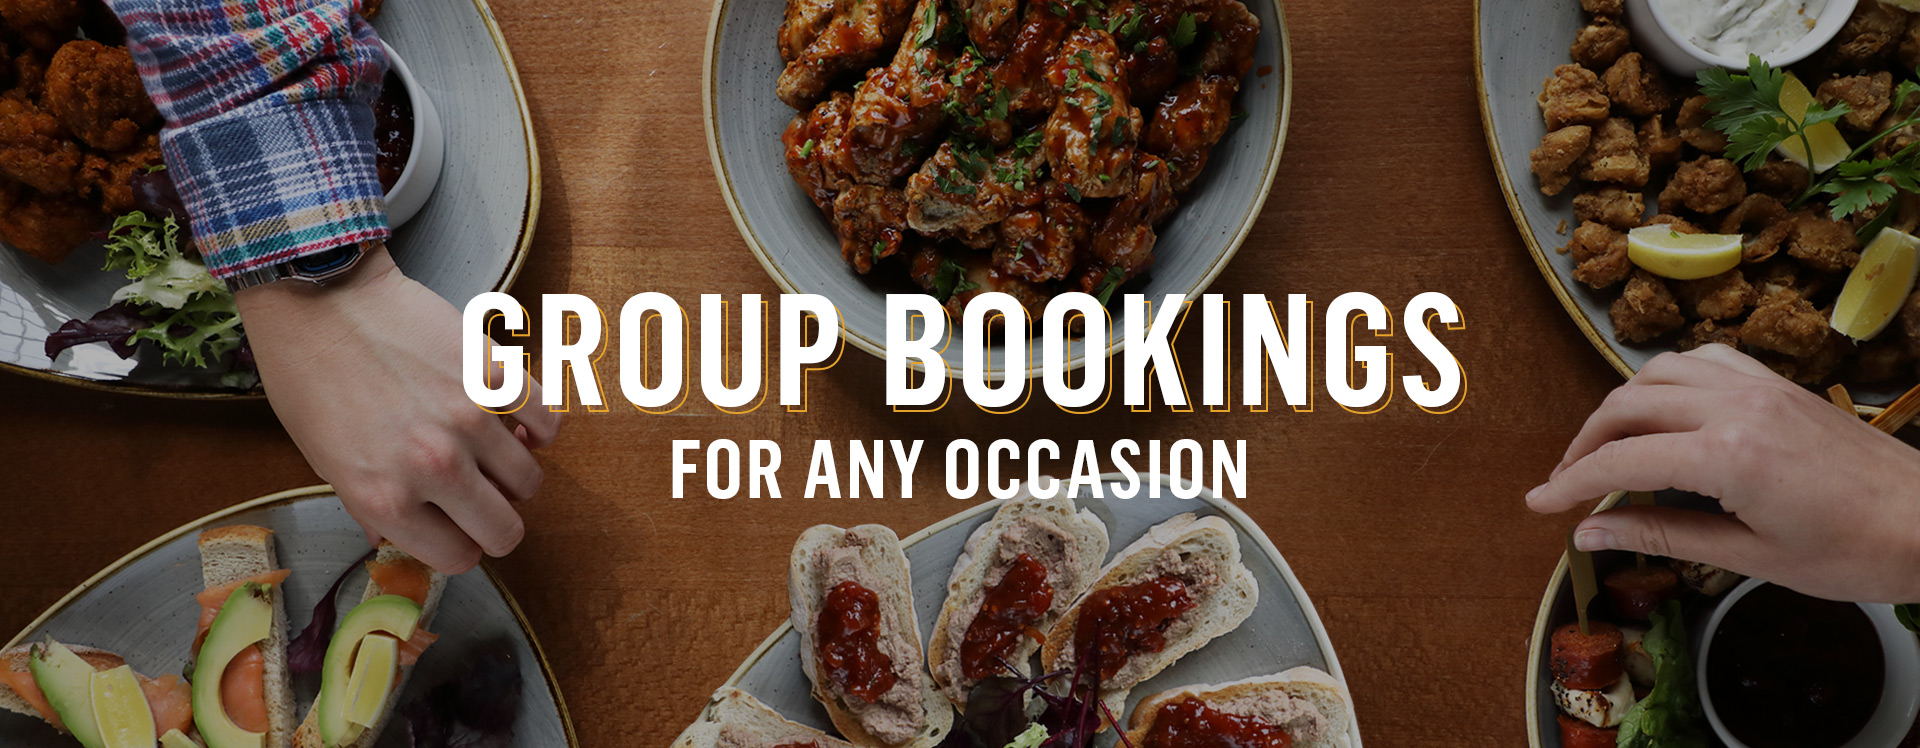 Group Bookings at Crown, Oxford